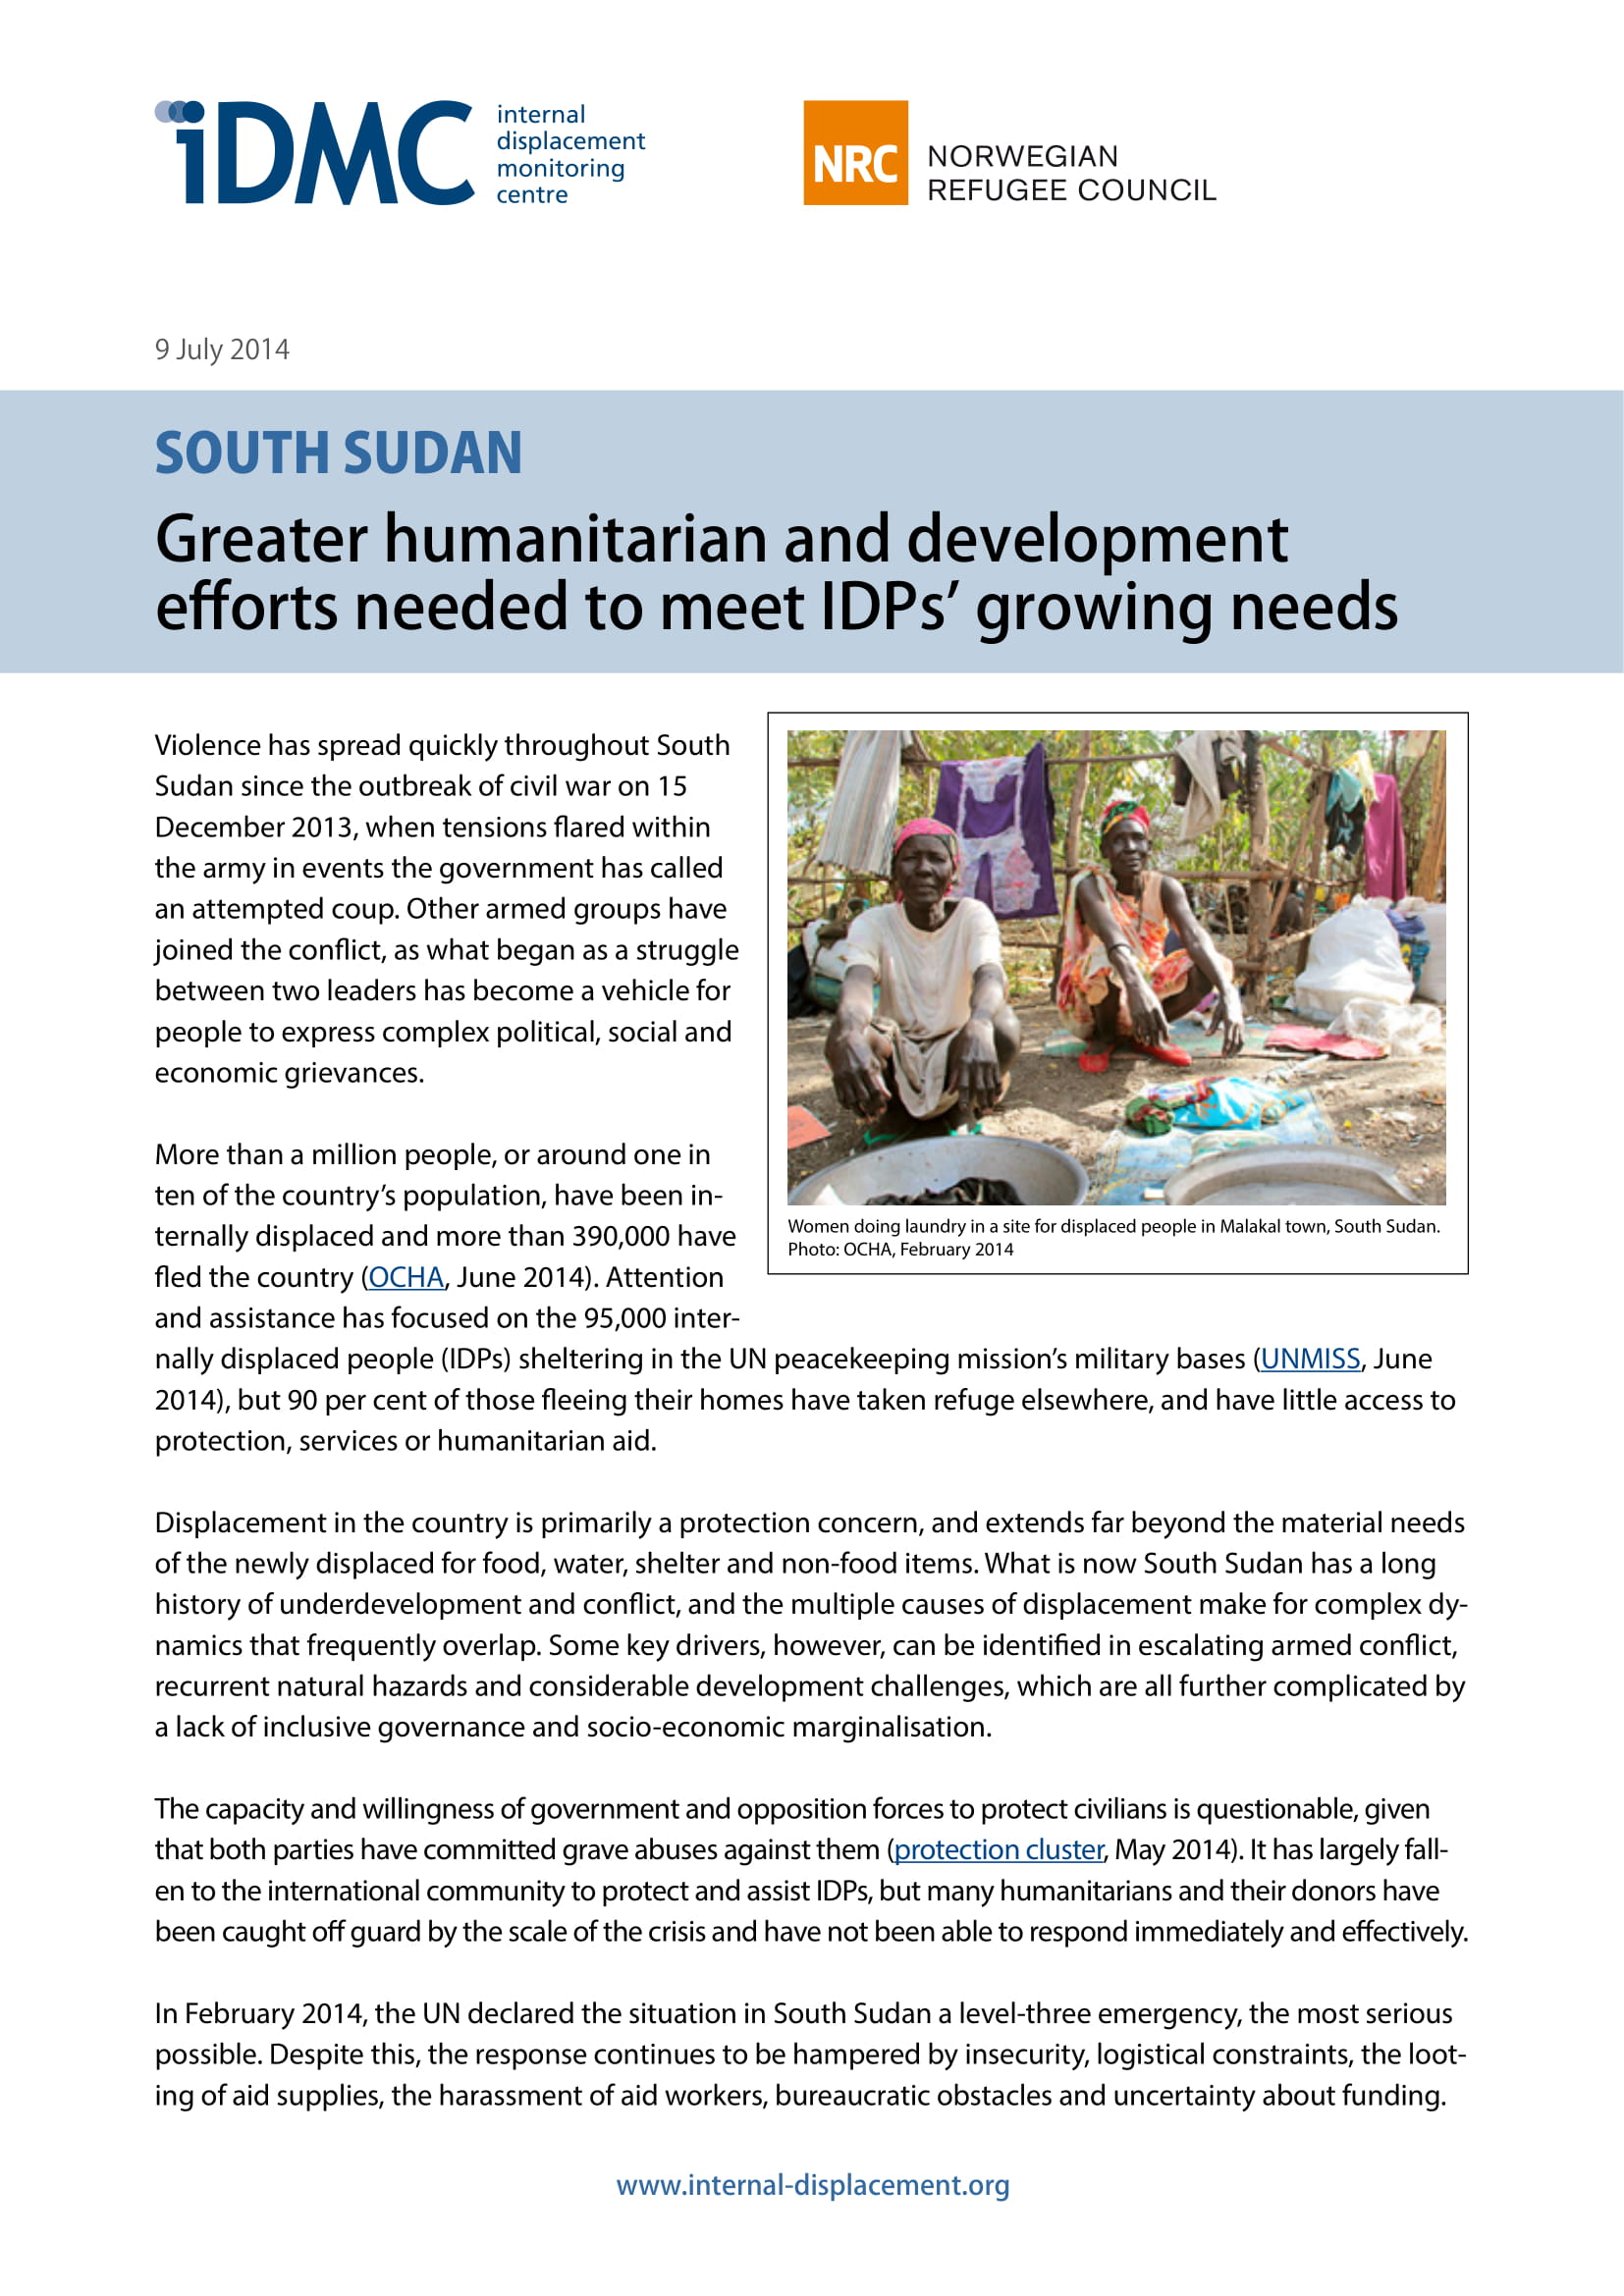 South Sudan: Greater humanitarian and development efforts needed to meet IDPs’ growing needs